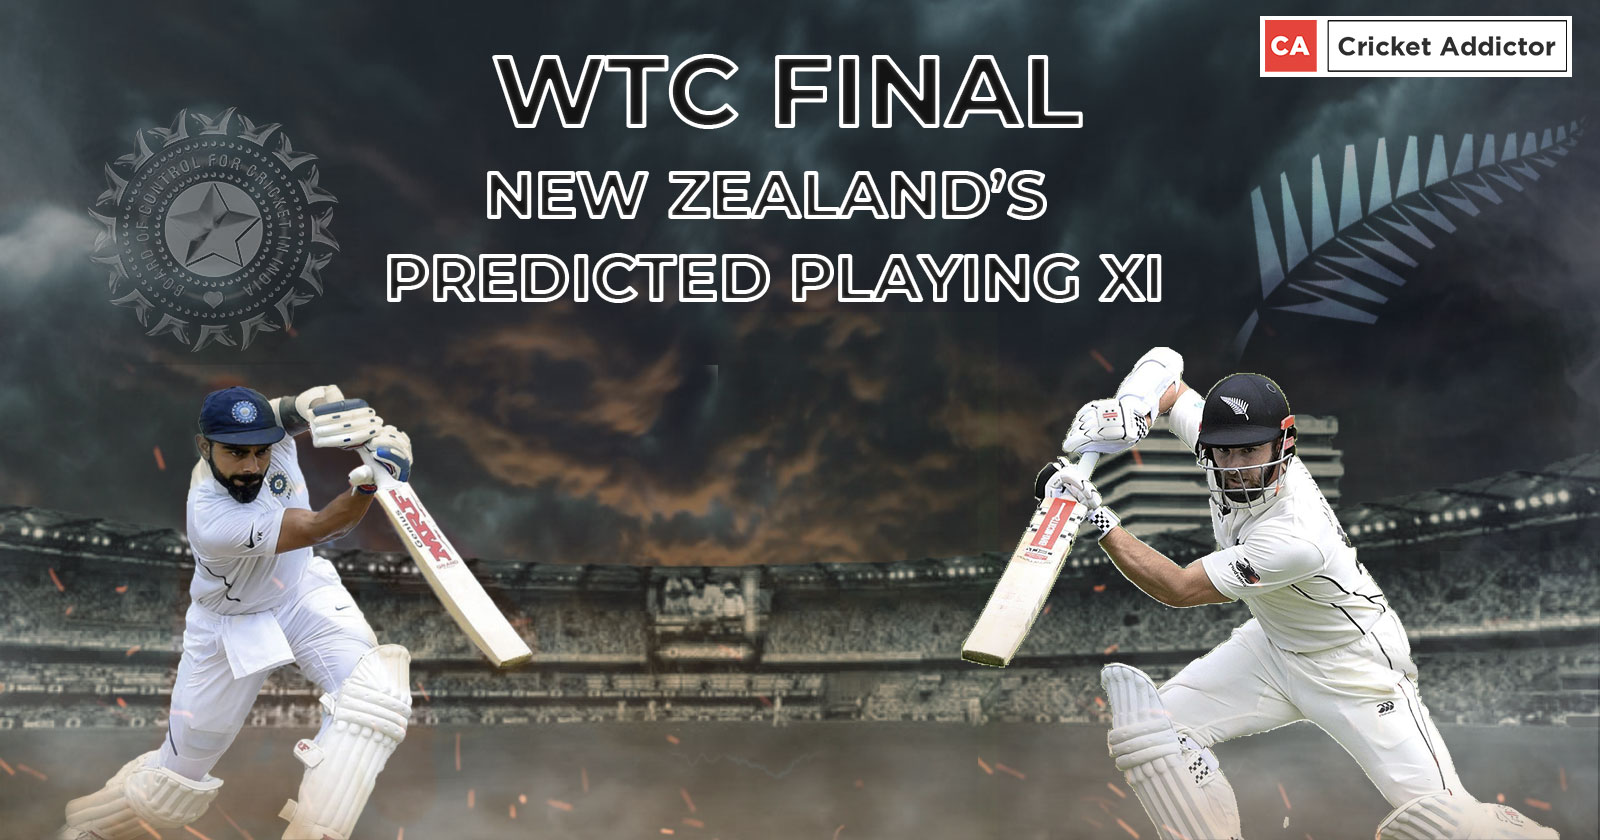 India vs New Zealand WTC Final- New Zealand's Predicted Playing XI